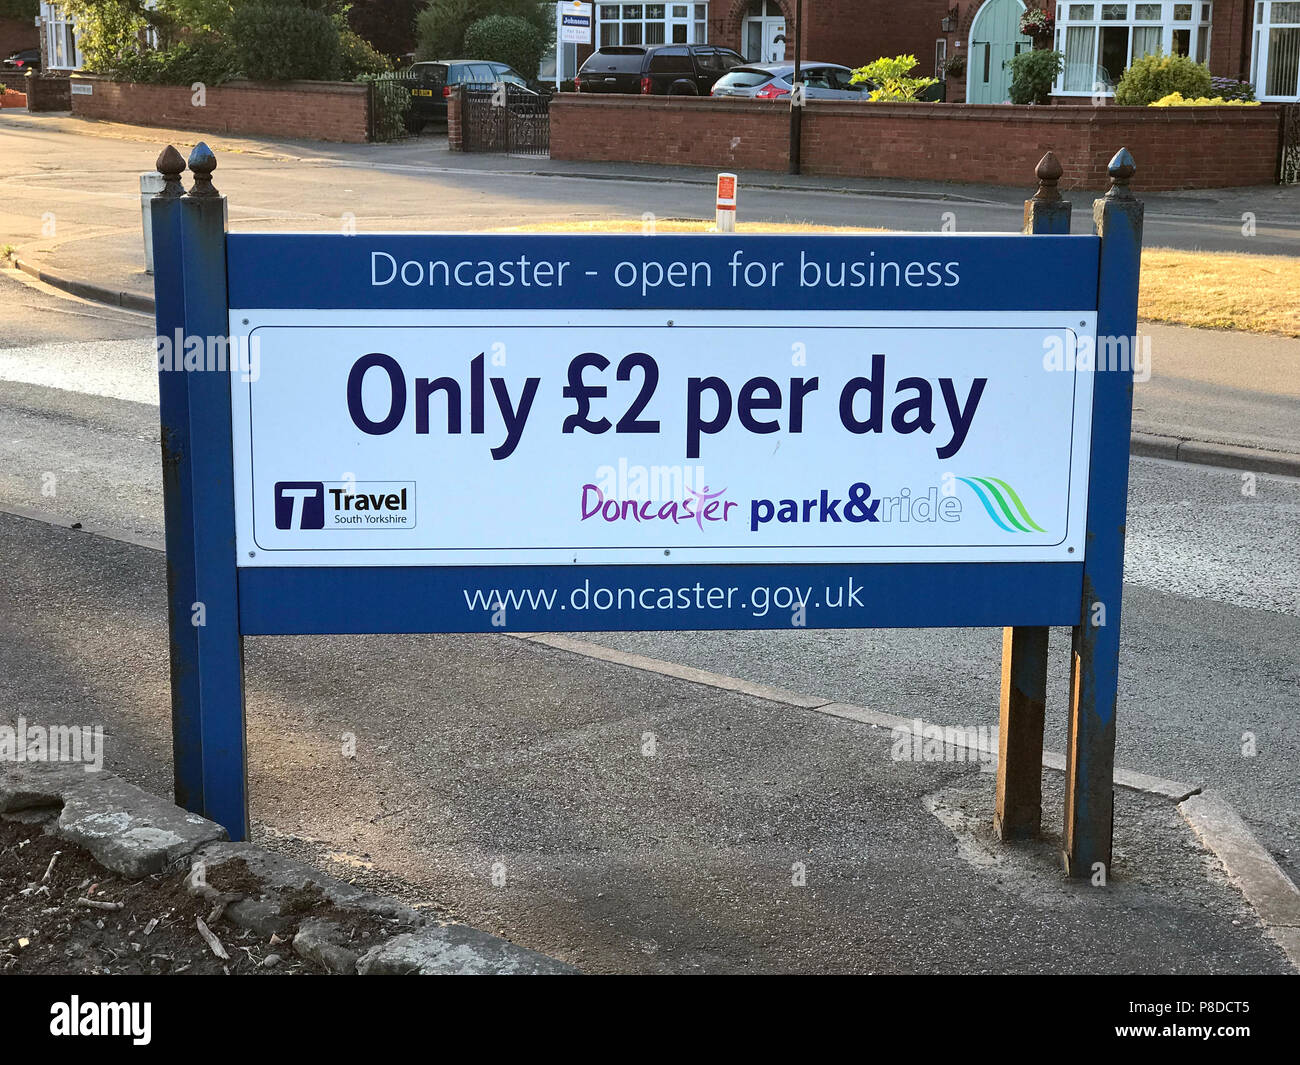 Doncaster, Open For Business, Only £2 per day, Town centre parking, sign, Doncaster, Yorkshire, England, UK, DN2 6AQ Stock Photo